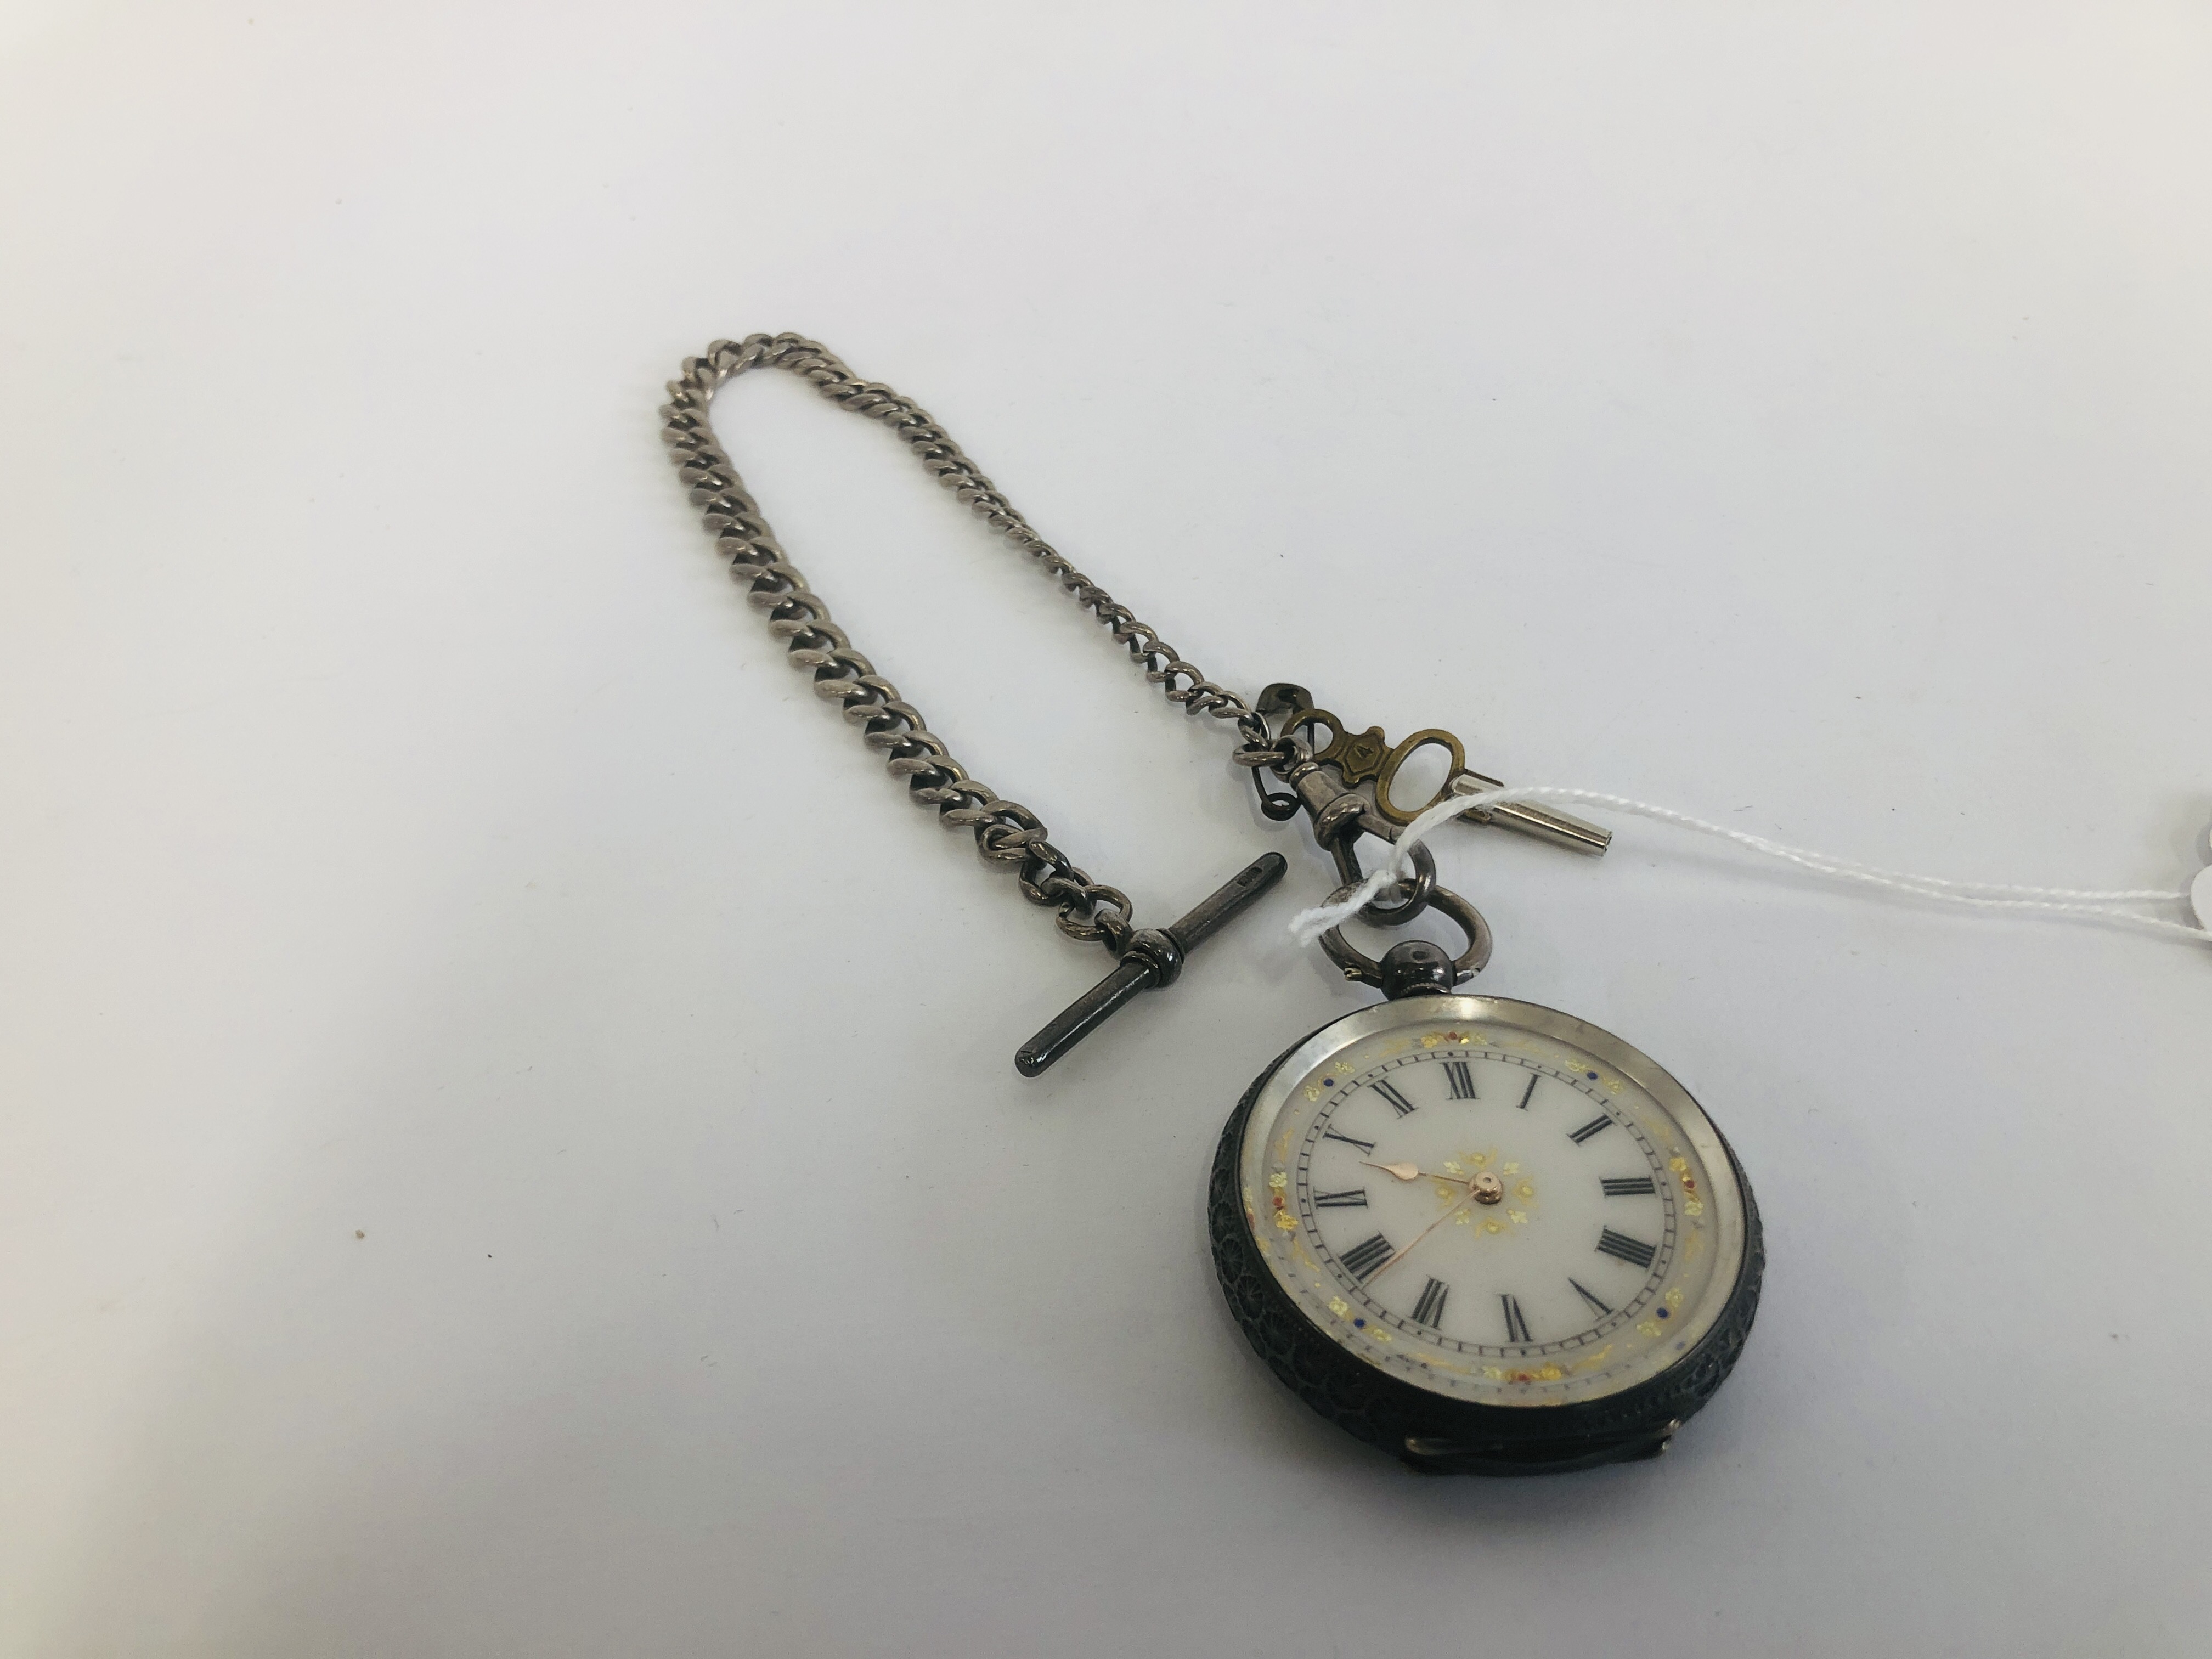 AN ORNATE SILVER POCKET WATCH WITH DECORATIVE ENAMELLED FACE ON SILVER T-BAR CHAIN